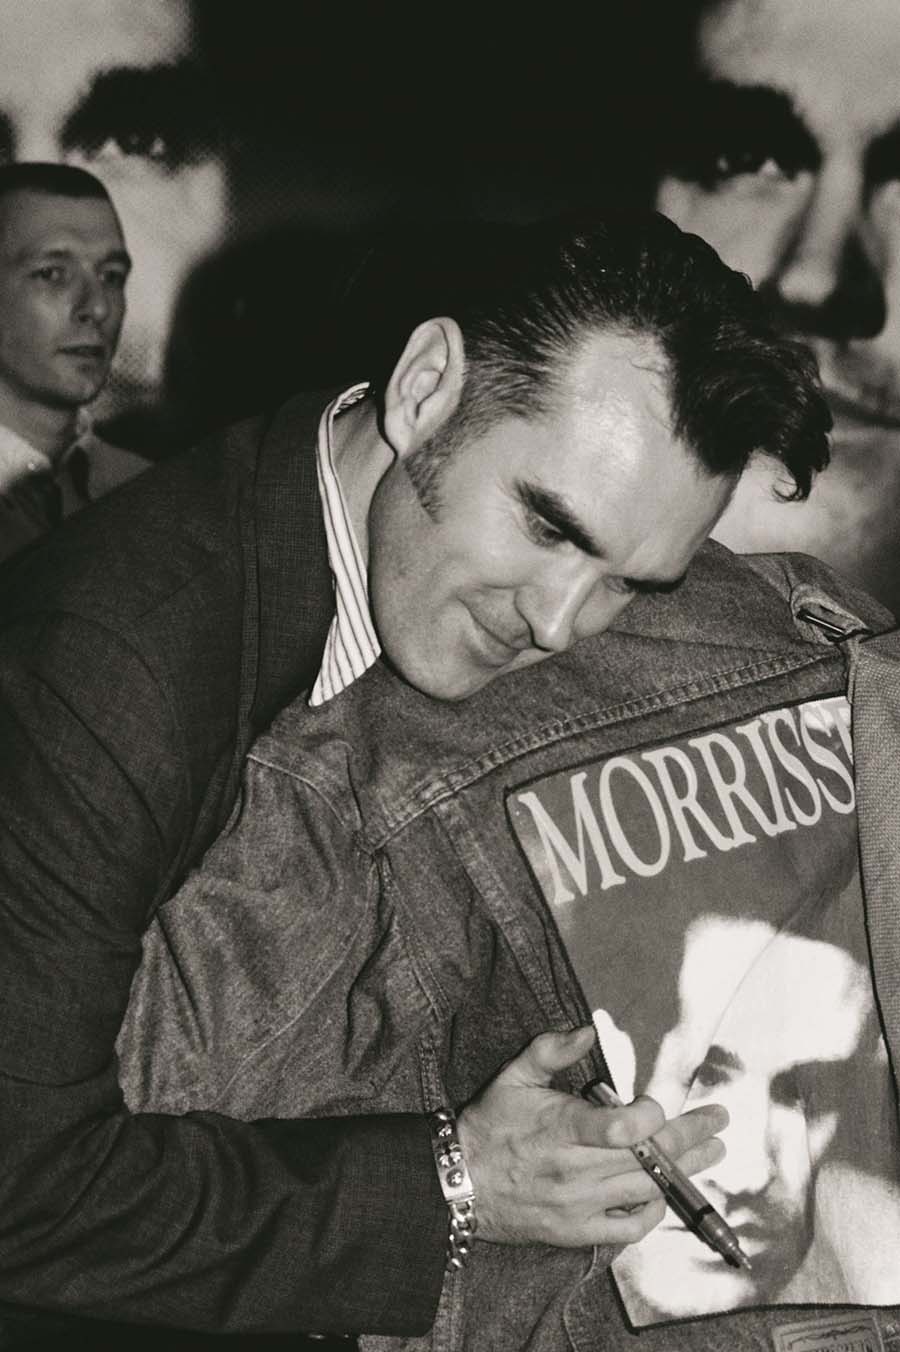 Morrissey, Alone and Palely Loitering